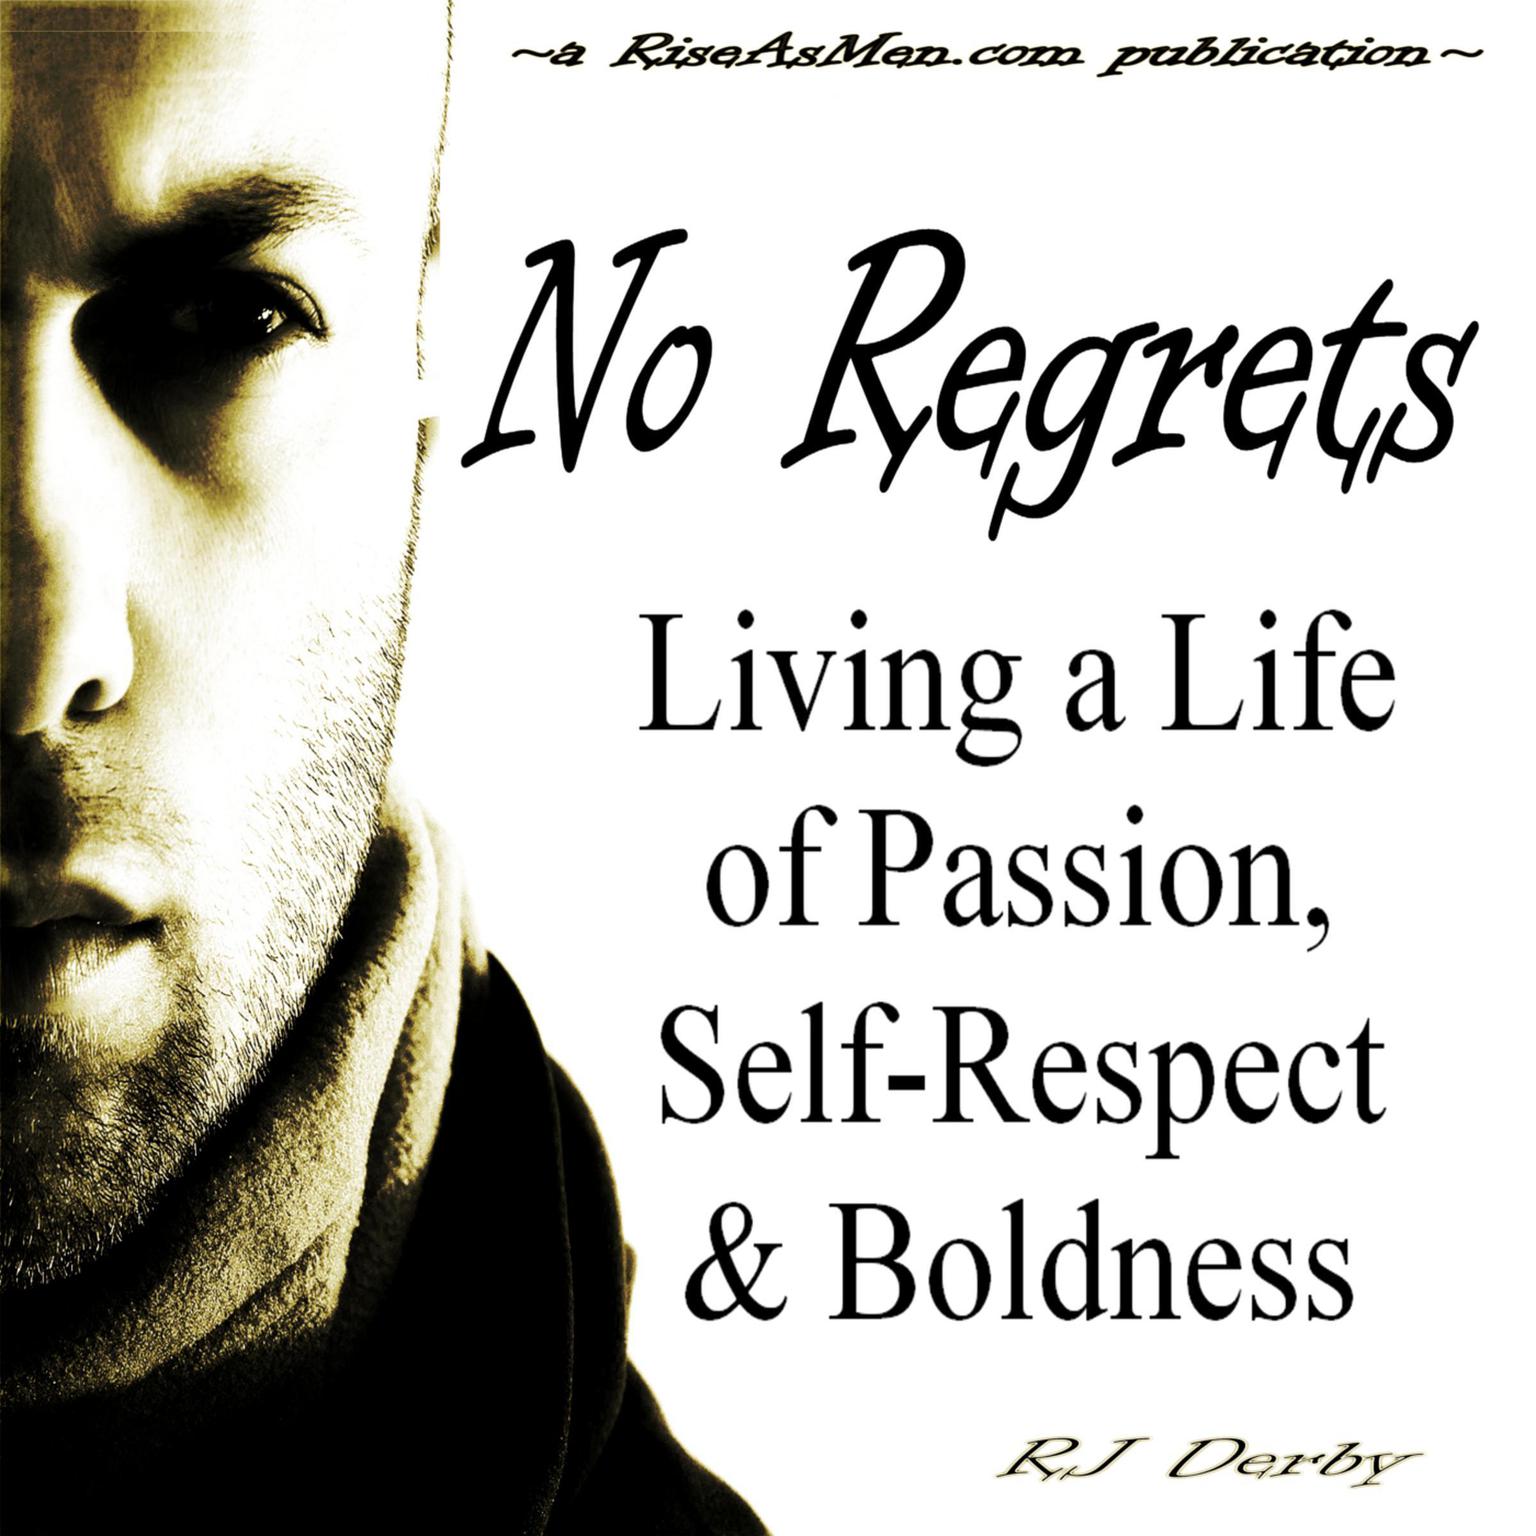 No Regrets: Living a Life of Passion, Self-Respect & Boldness Audiobook, by RJ Derby